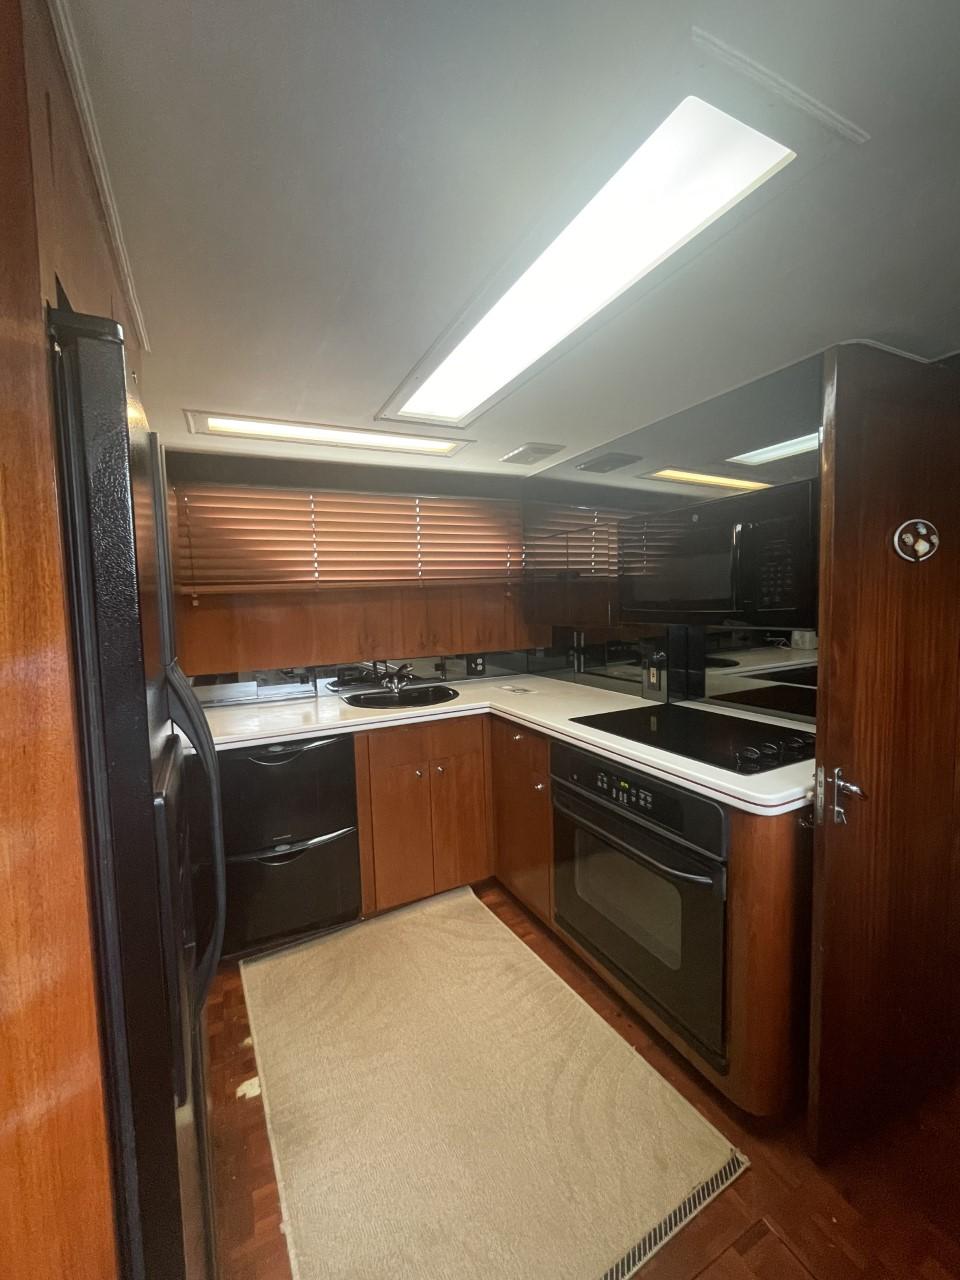 1989 67 Hatteras Motor Yacht Class Act Galley